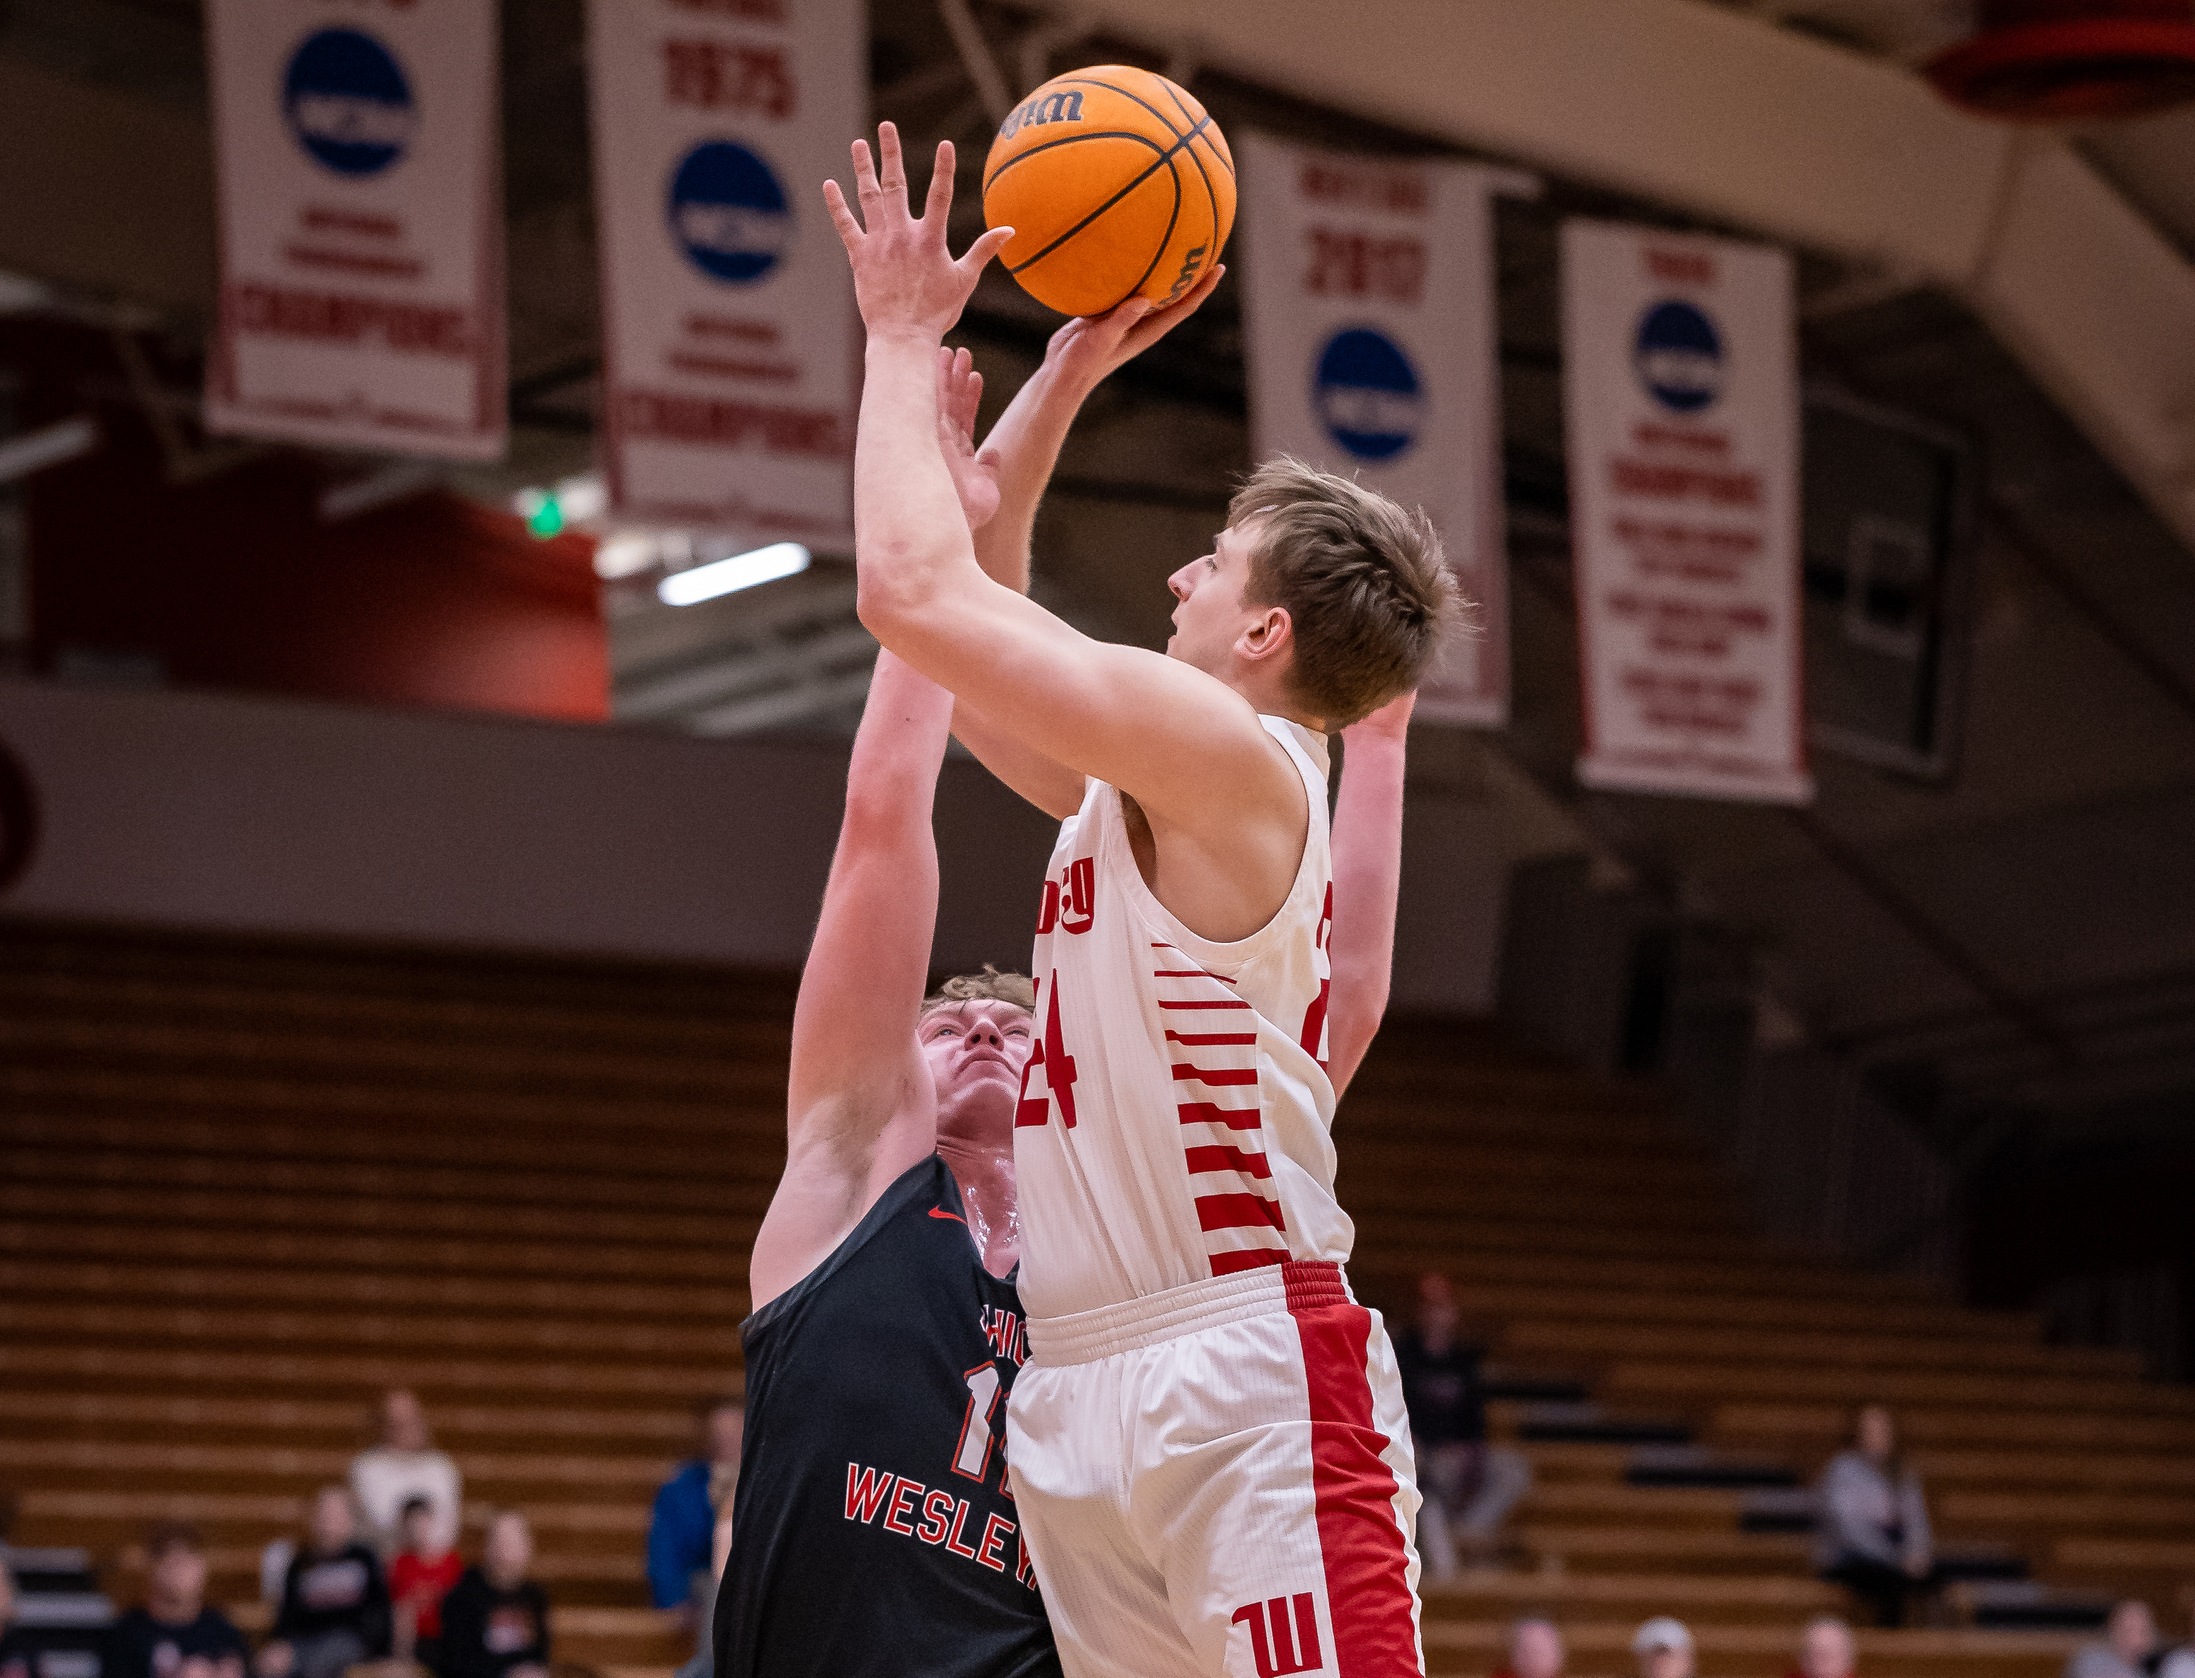 Wittenberg freshman Tyler Galluch attempts a shot during the Tigers' 71-59 win over Ohio Wesleyan in the NCAC Tournament quarterfinals on Tuesday. | Photo by Pam Klopfer